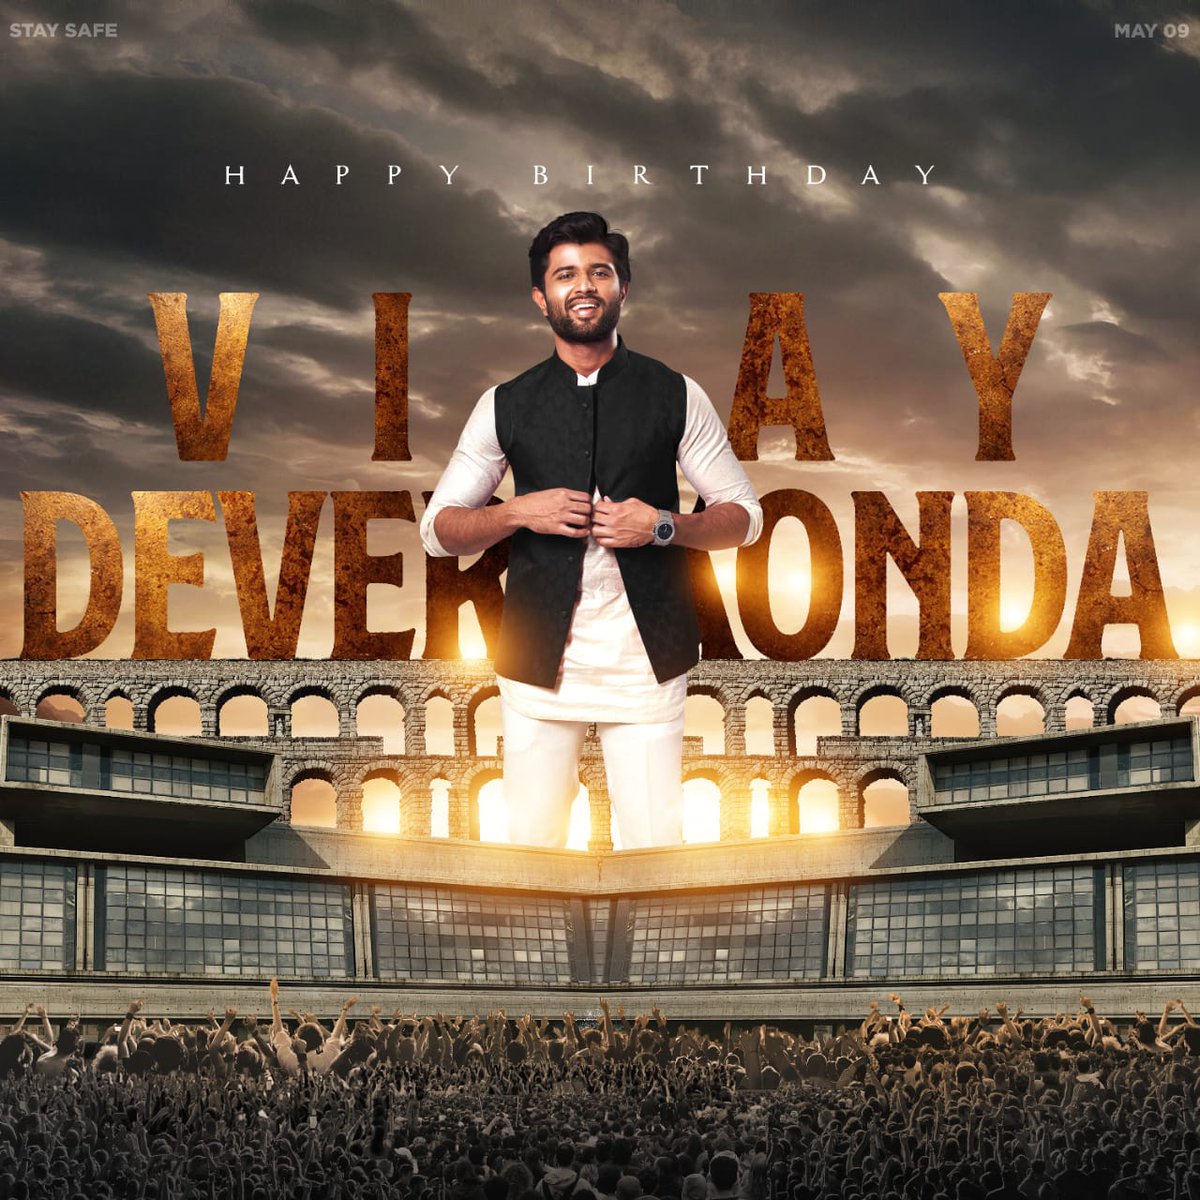 Here's the CDP to celebrate @TheDeverakonda 's birthday
 #HBDVijayDeverakonda  #VijayDeverakonda #LIGER #getnithyafied